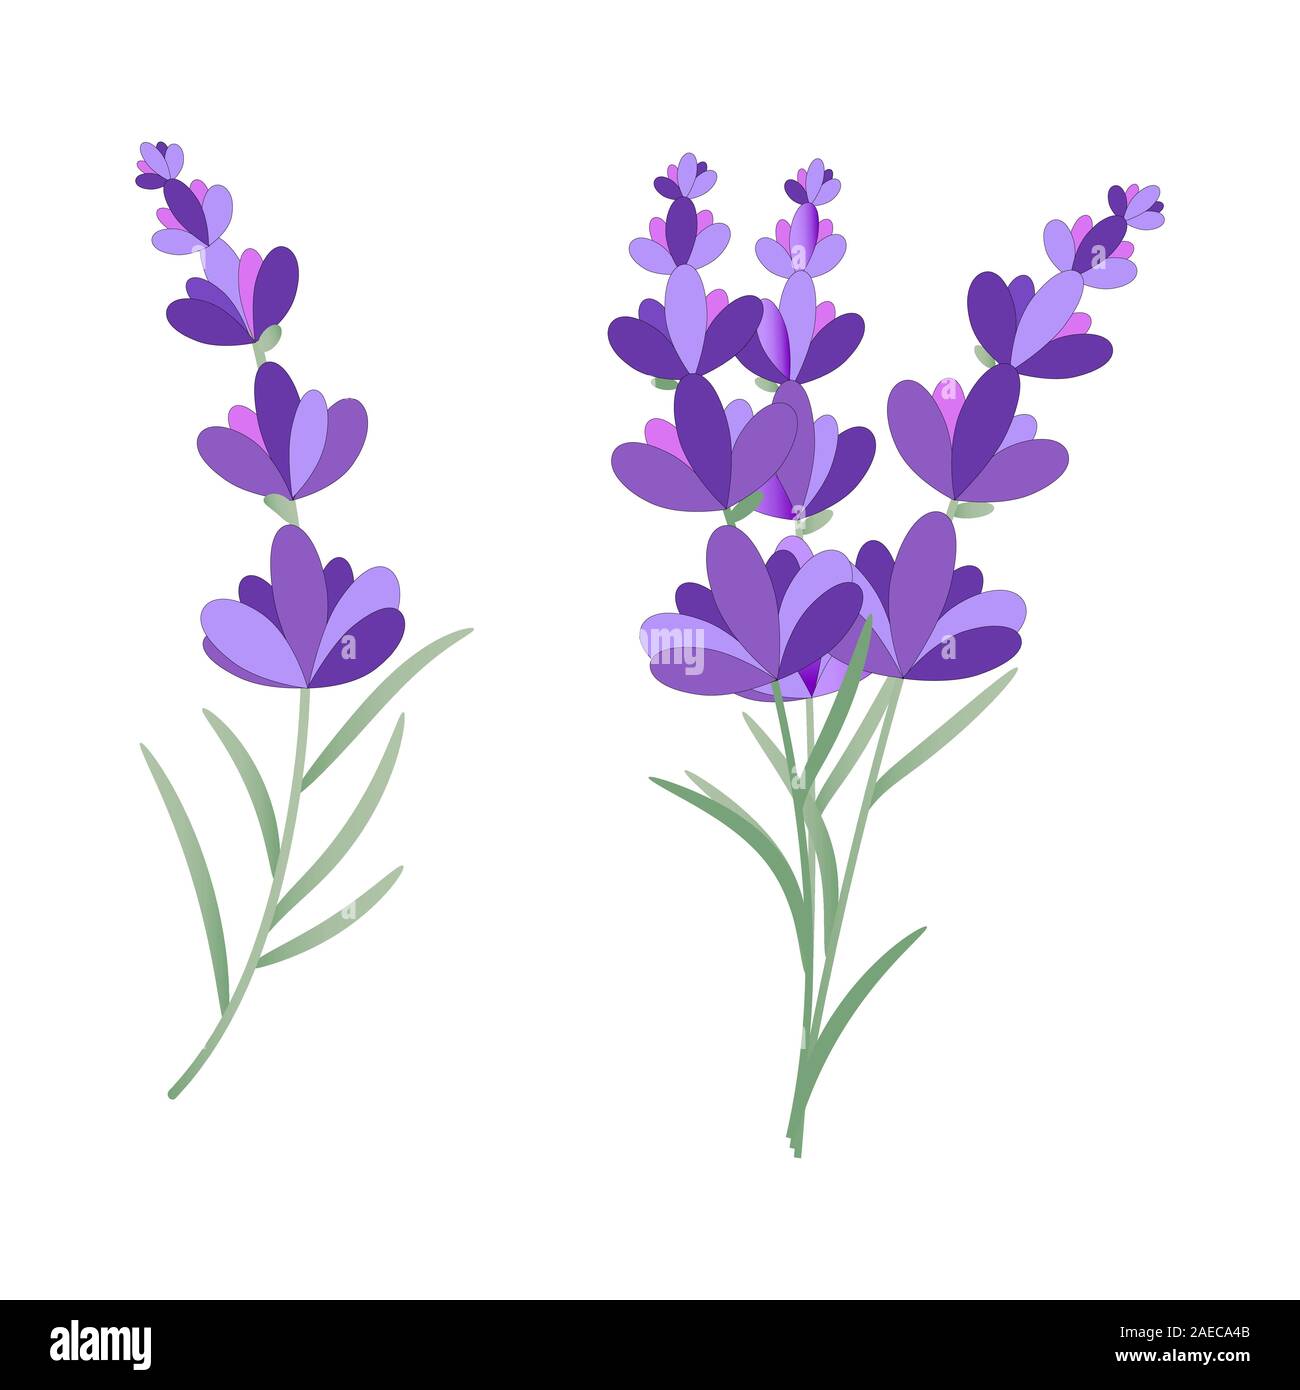 Lavender Hand Painted Decorative Pattern PNG Picture EPS images free  download_1945 × 1667 px - Lovepik